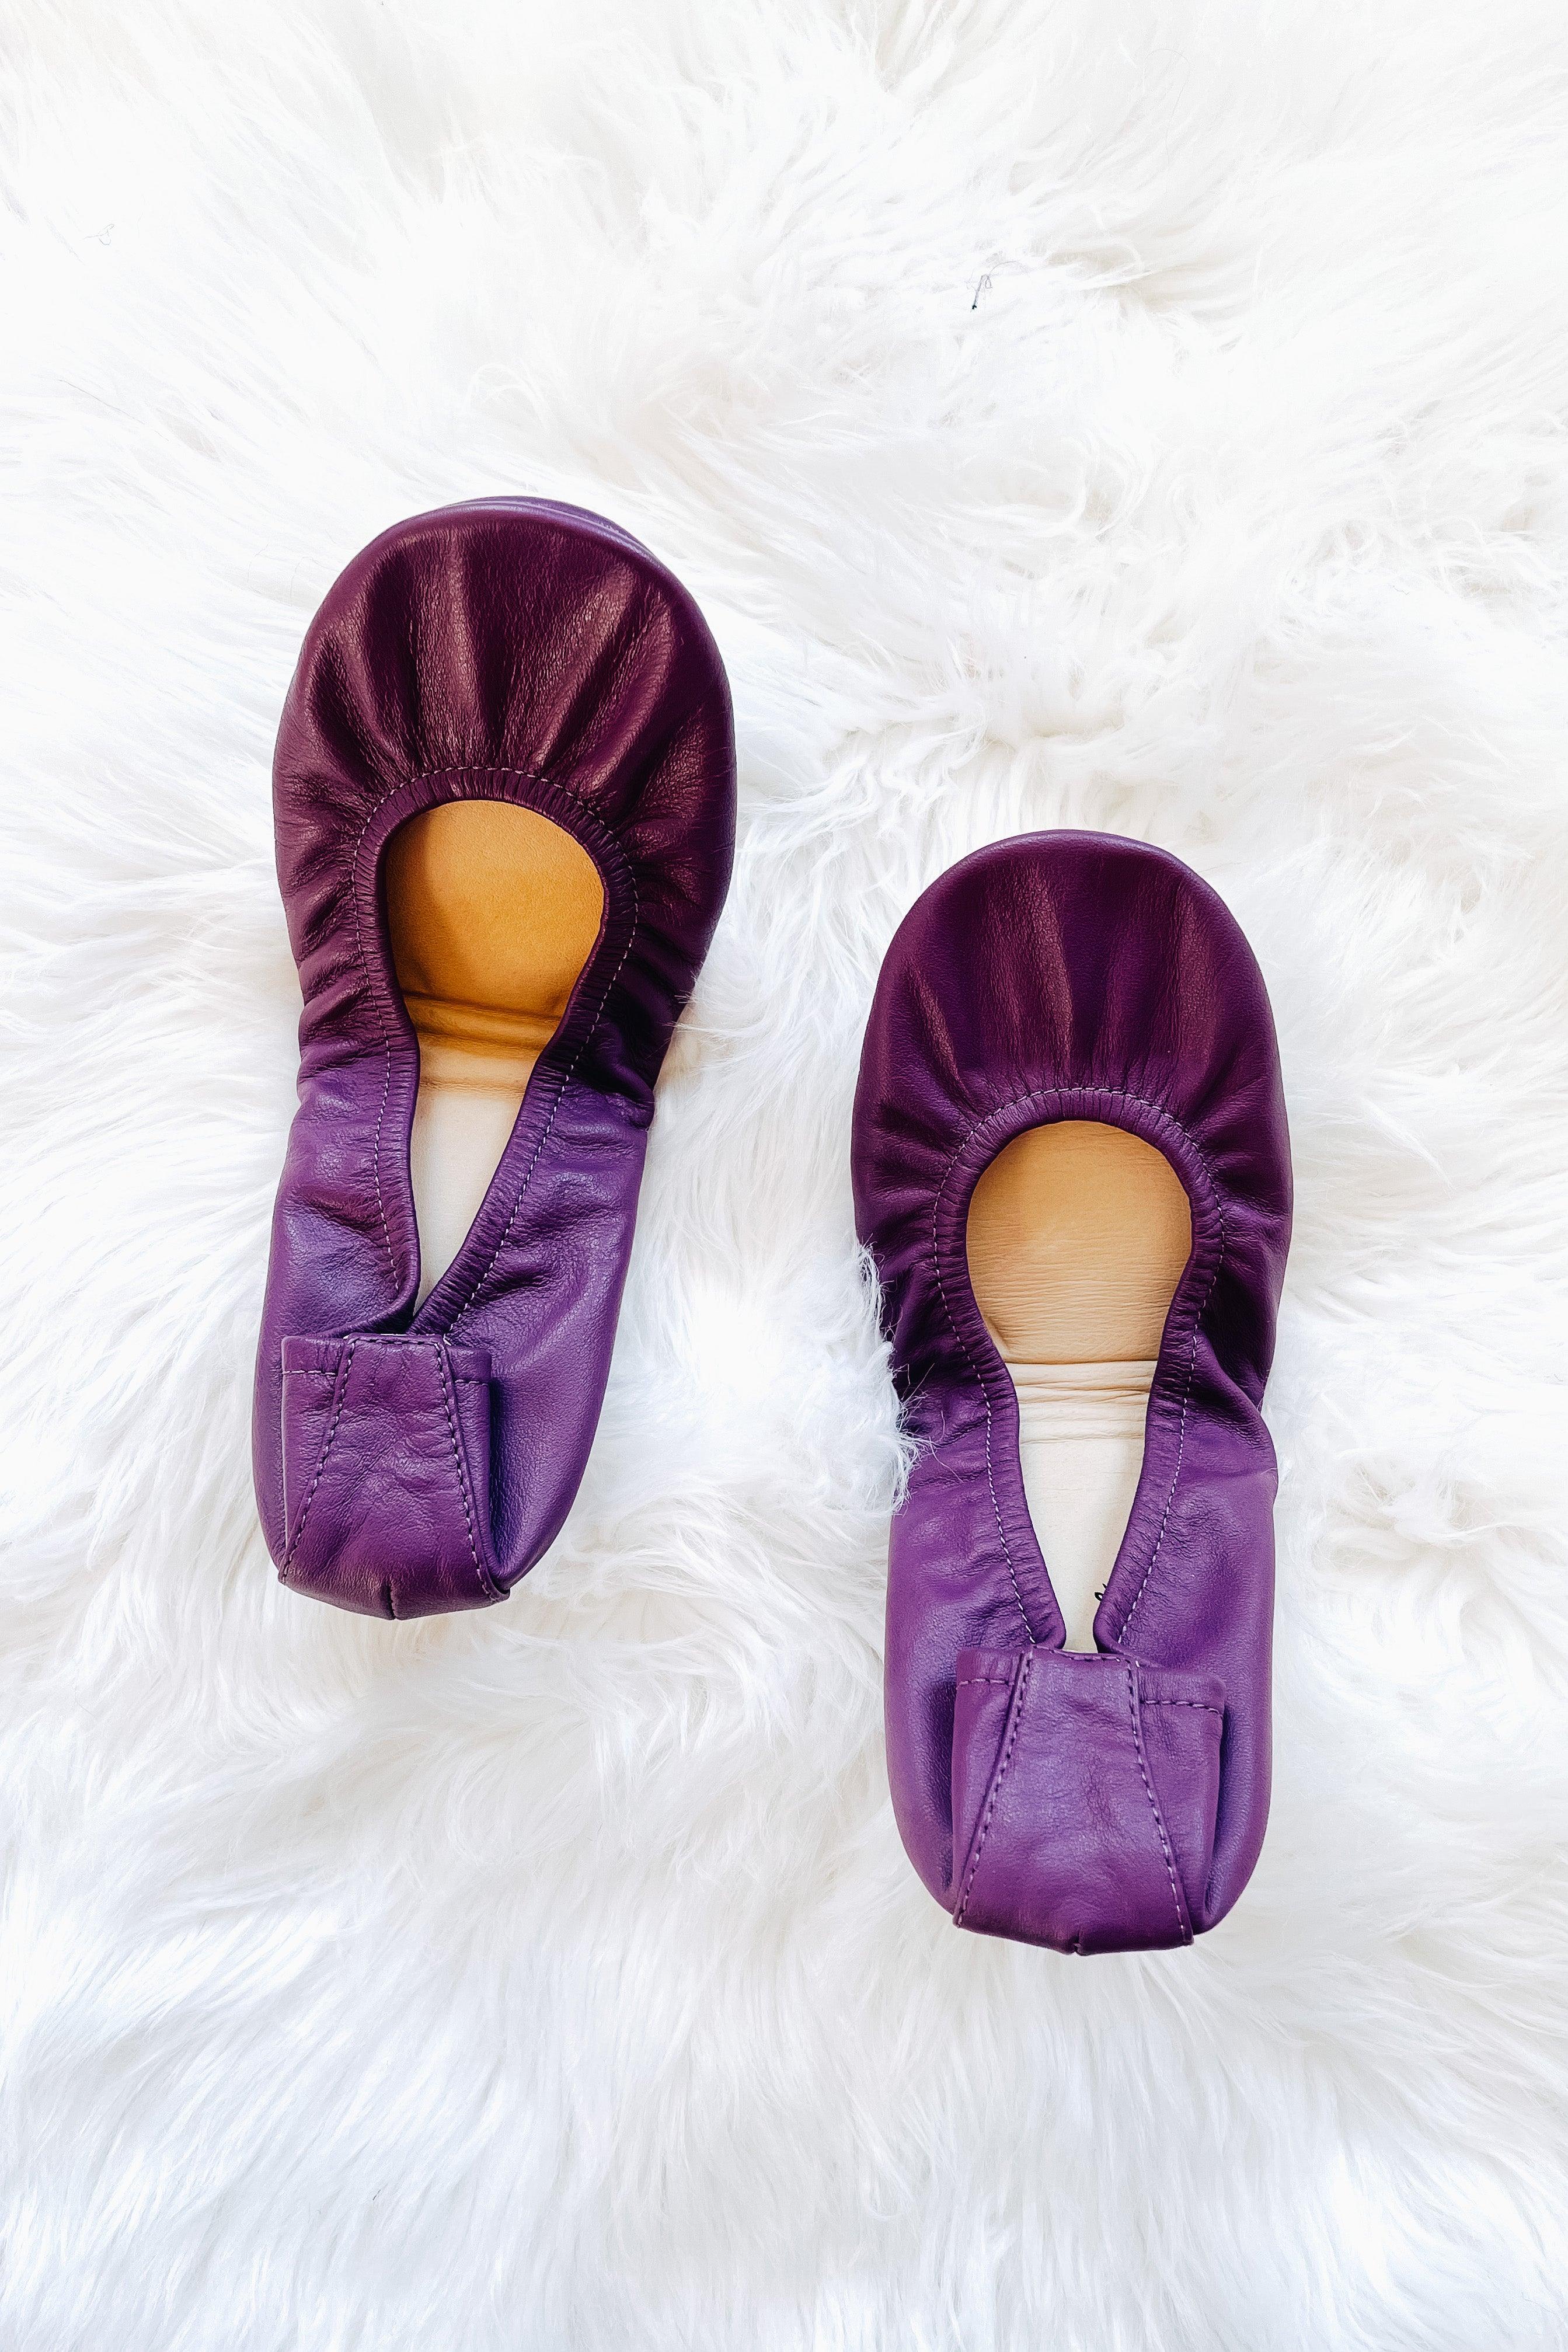 The Storehouse Flats • Perfectly Plum - Atomic Wildflower